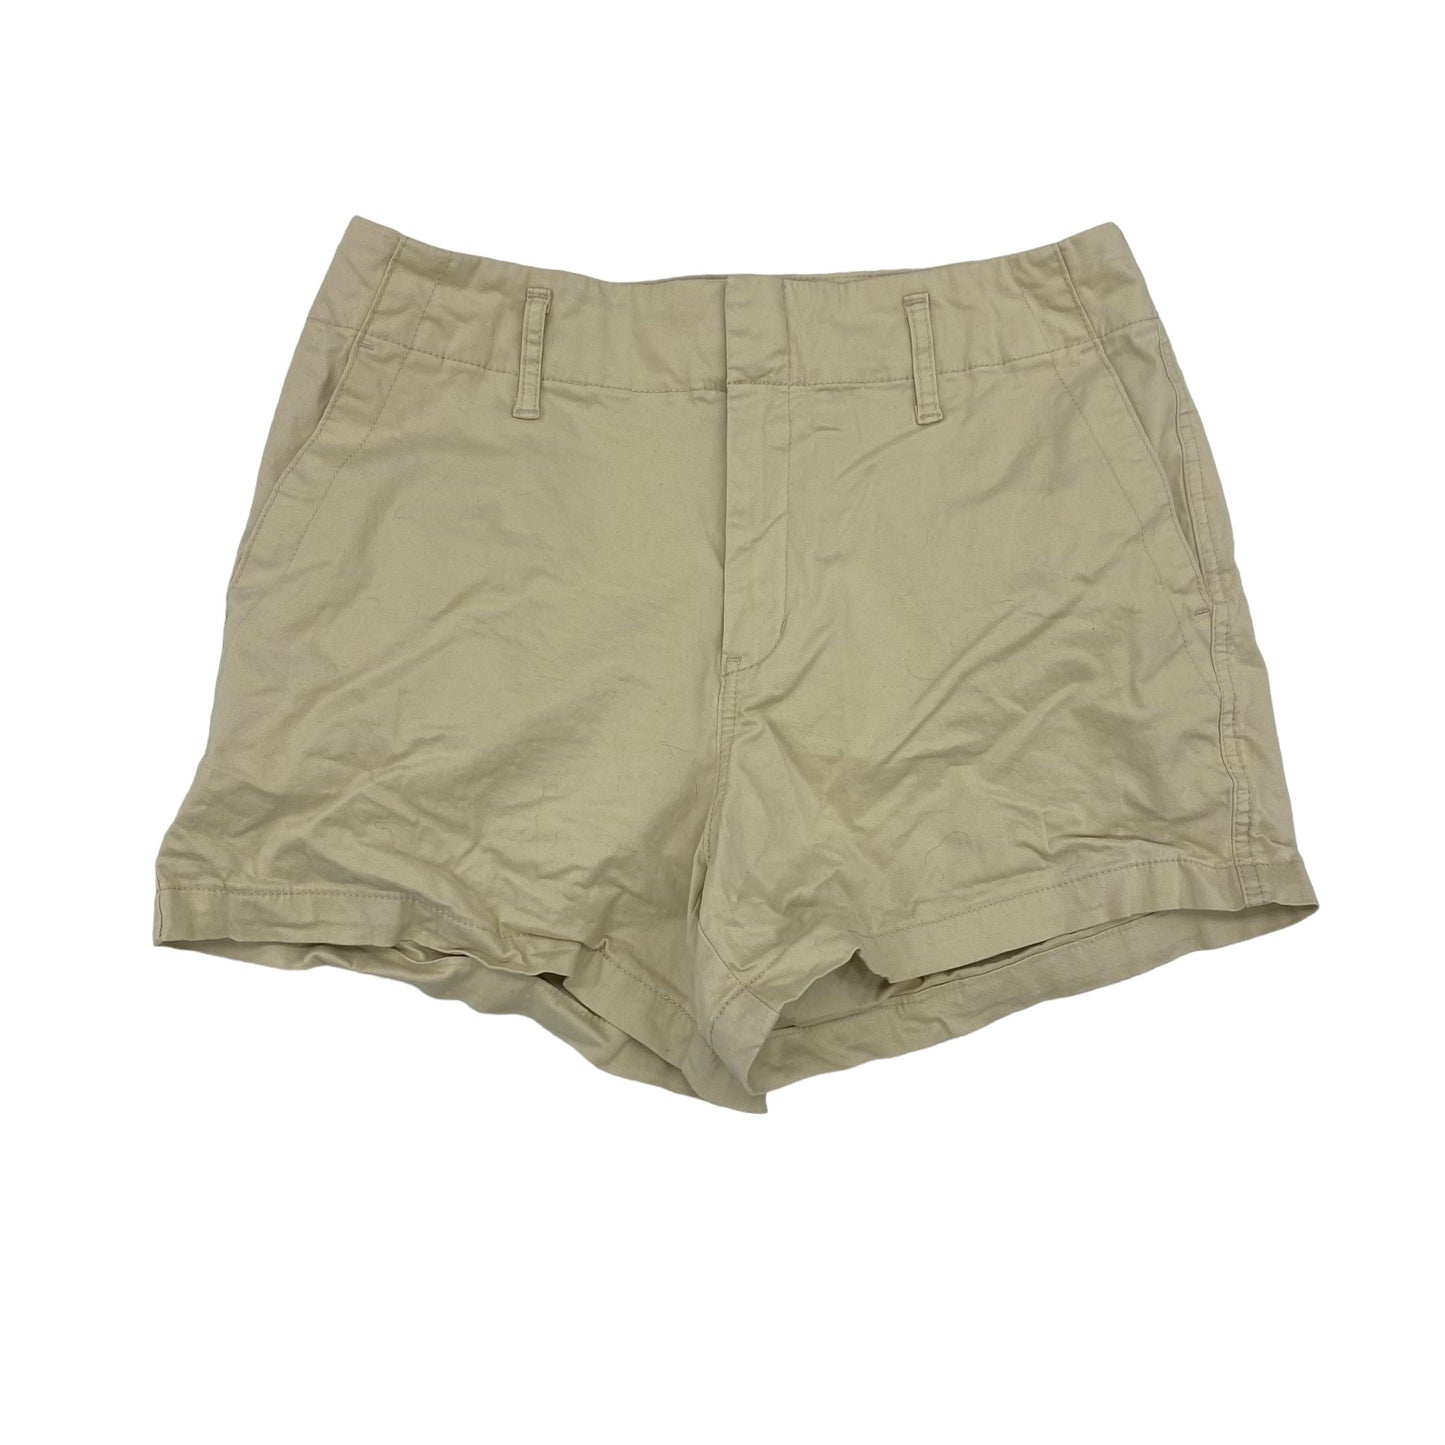 TAN A NEW DAY SHORTS, Size 8